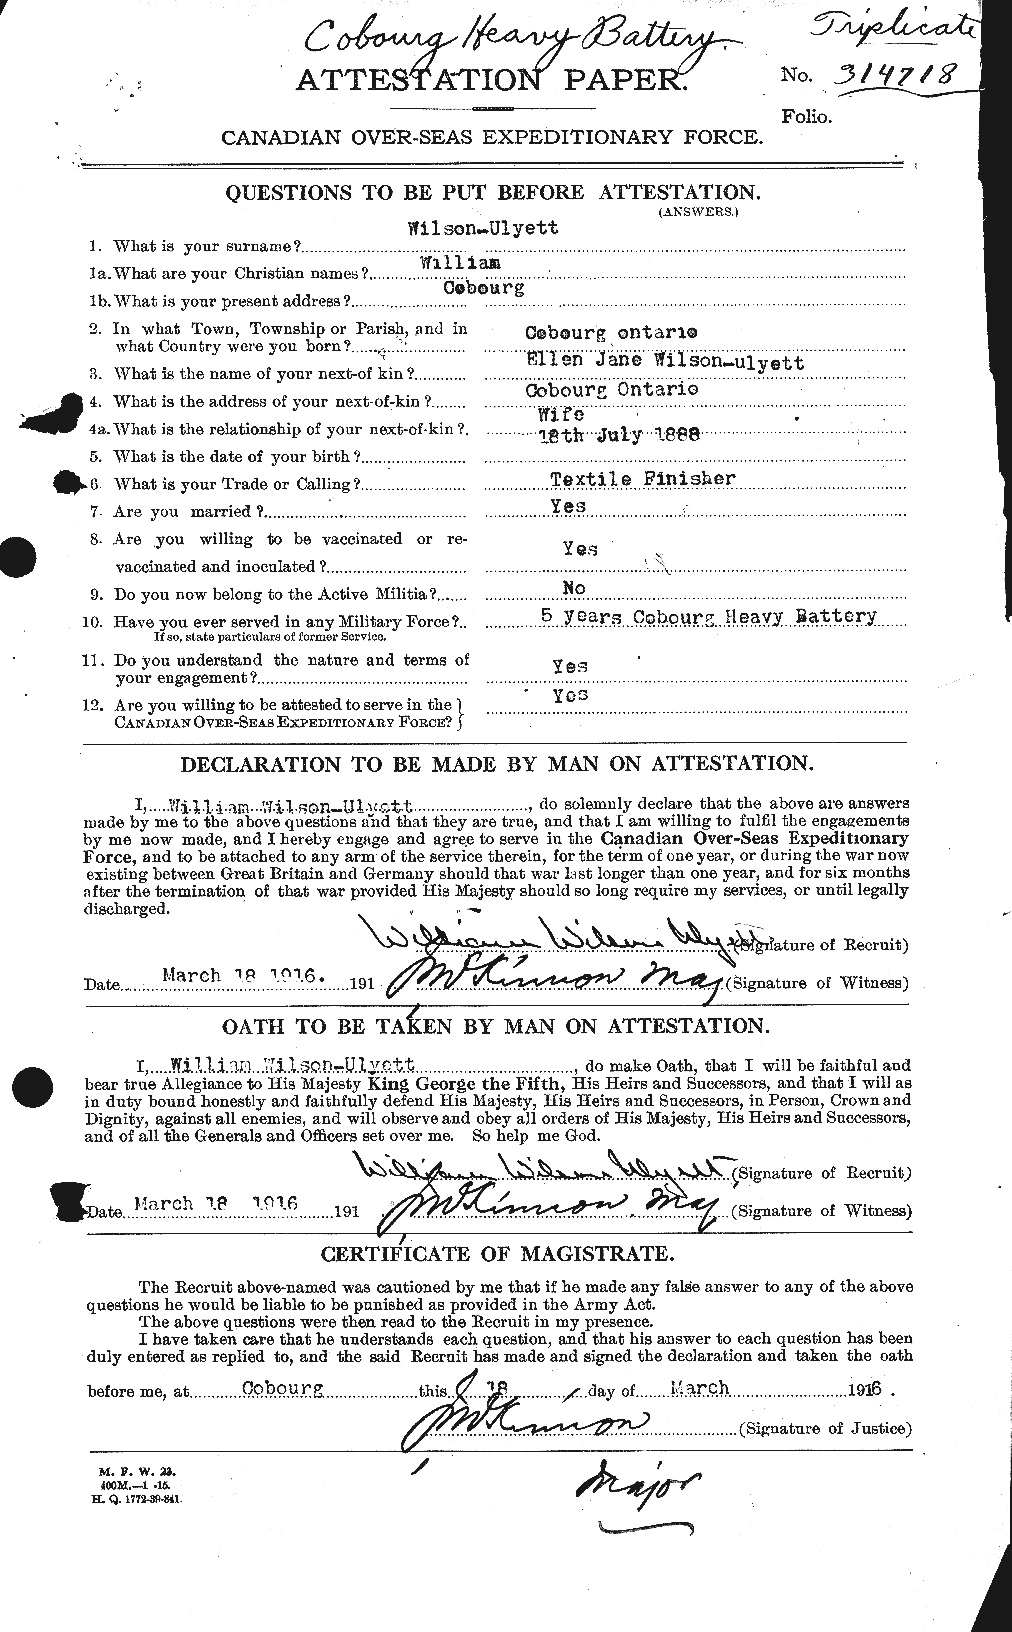 Personnel Records of the First World War - CEF 684128a